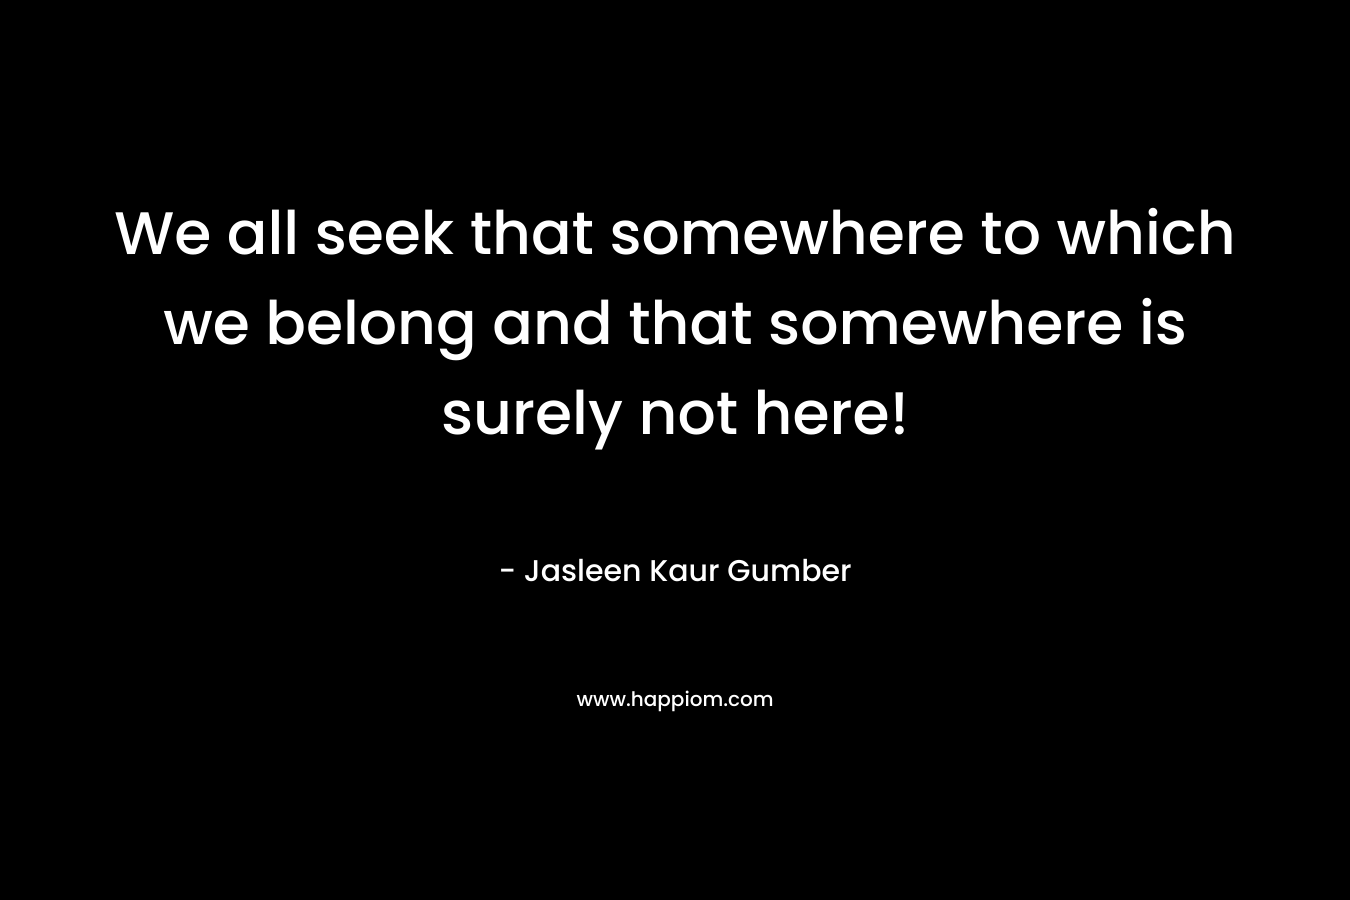 We all seek that somewhere to which we belong and that somewhere is surely not here!